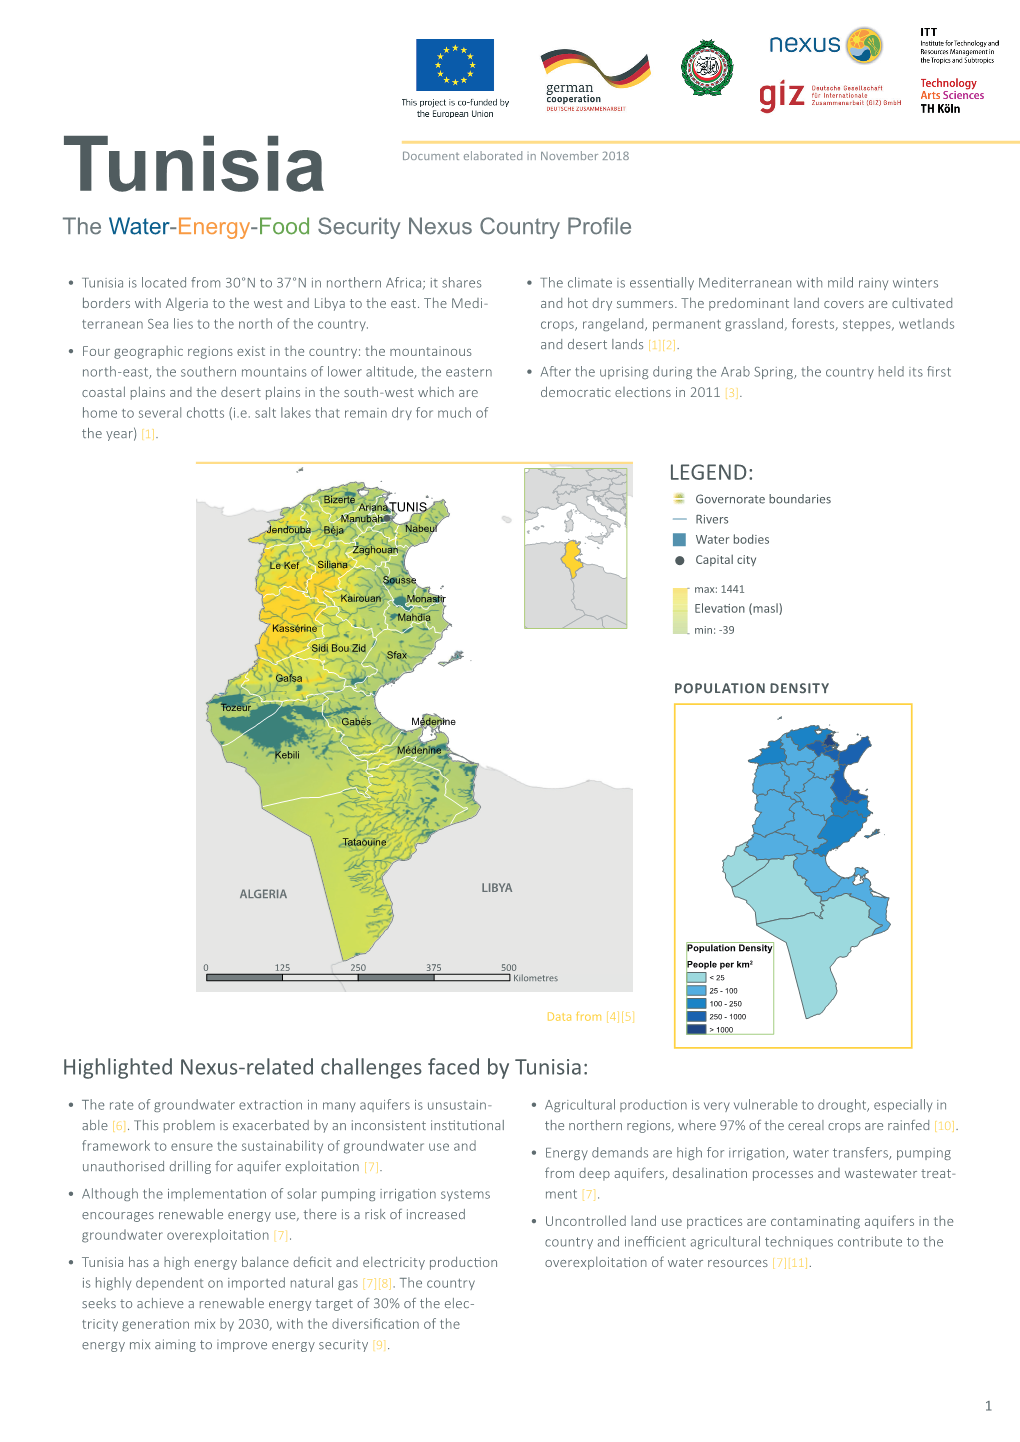 Tunisia Document Elaborated in November 2018 the Water-Energy-Food Security Nexus Country Profile